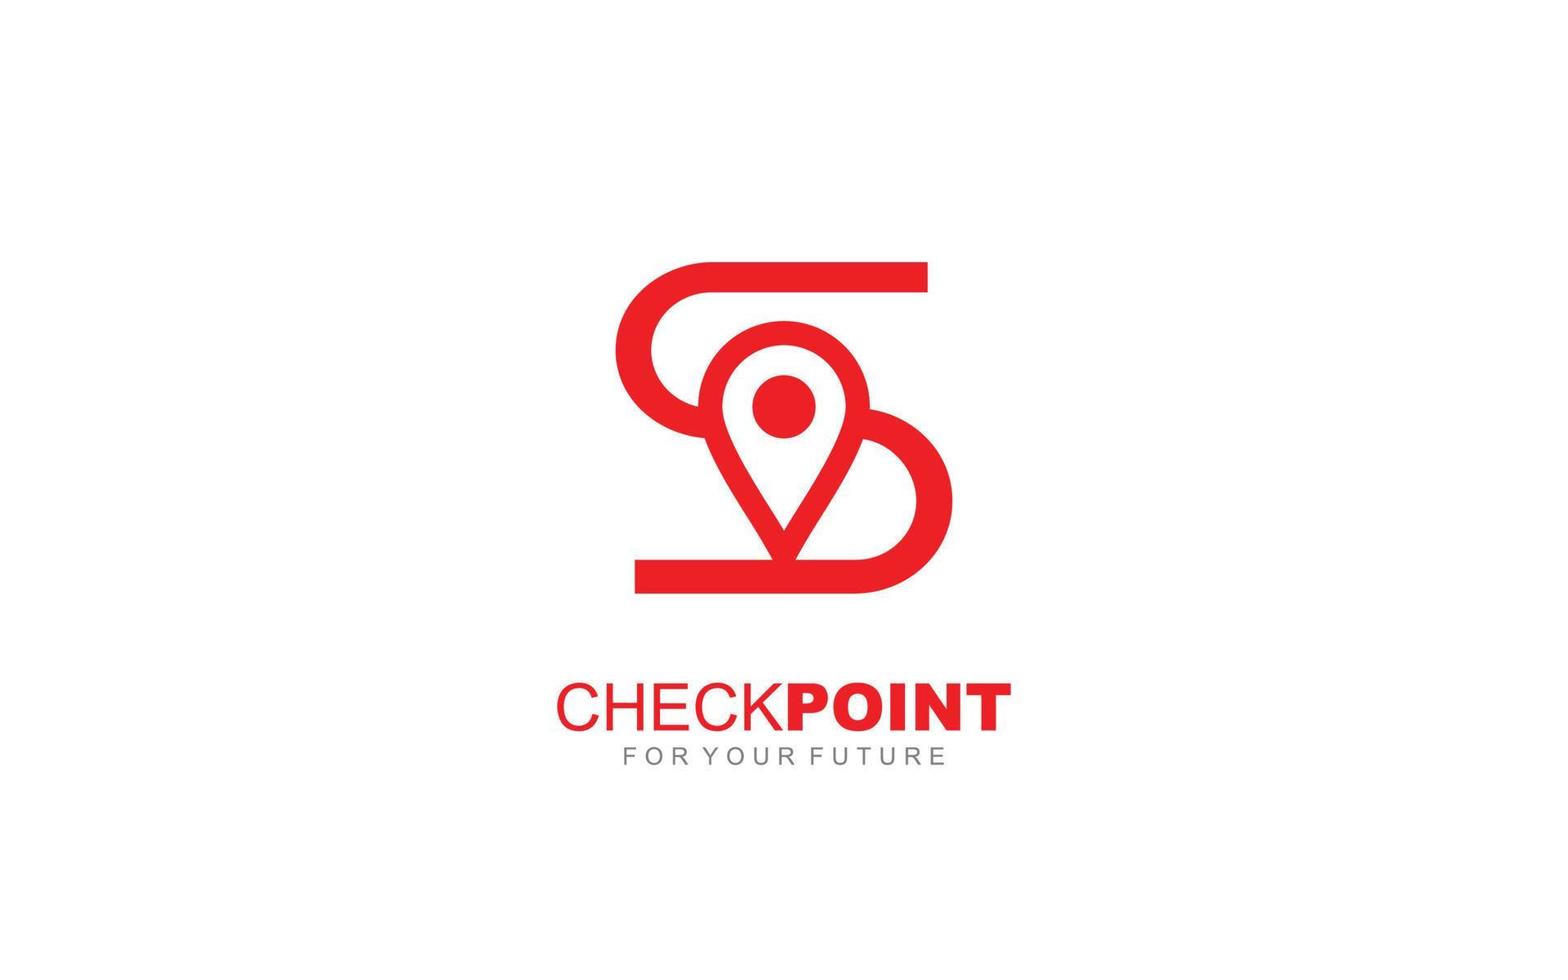 S logo point for identity. travel template vector illustration for your brand.